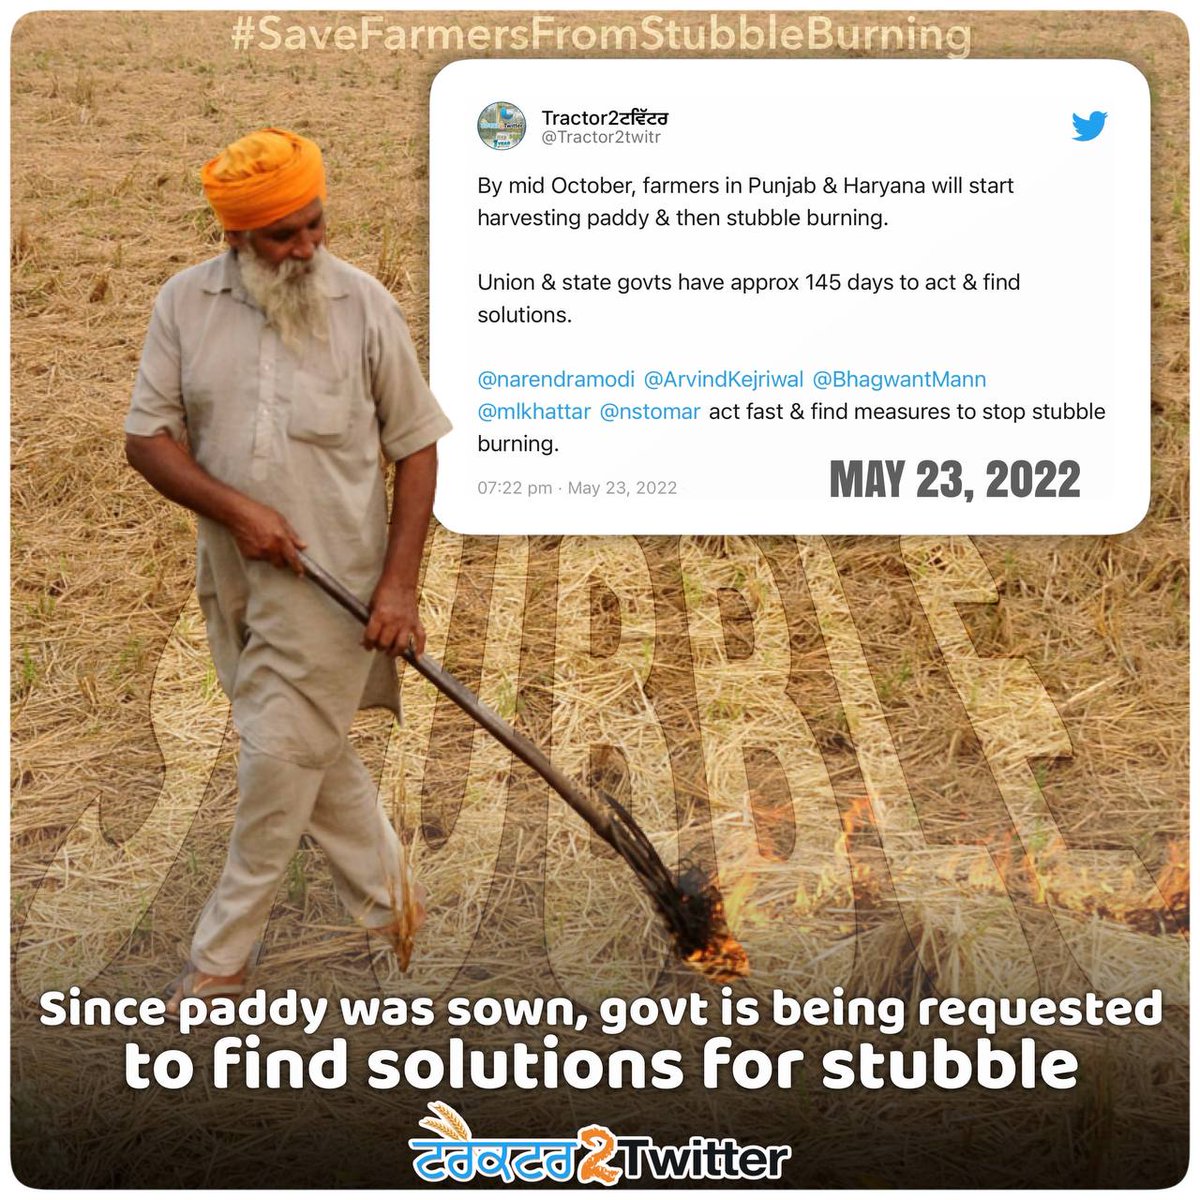 Farmers wr requesting govts to find solution for stubble They wr expecting economical solutions & incentives. But what did they get? FIRs Land records diluted Abuses by IT Cells @narendramodi @ArvindKejriwal @BhagwantMann @mlkhattar @nstomar #SaveFarmersFromStubbleBurning